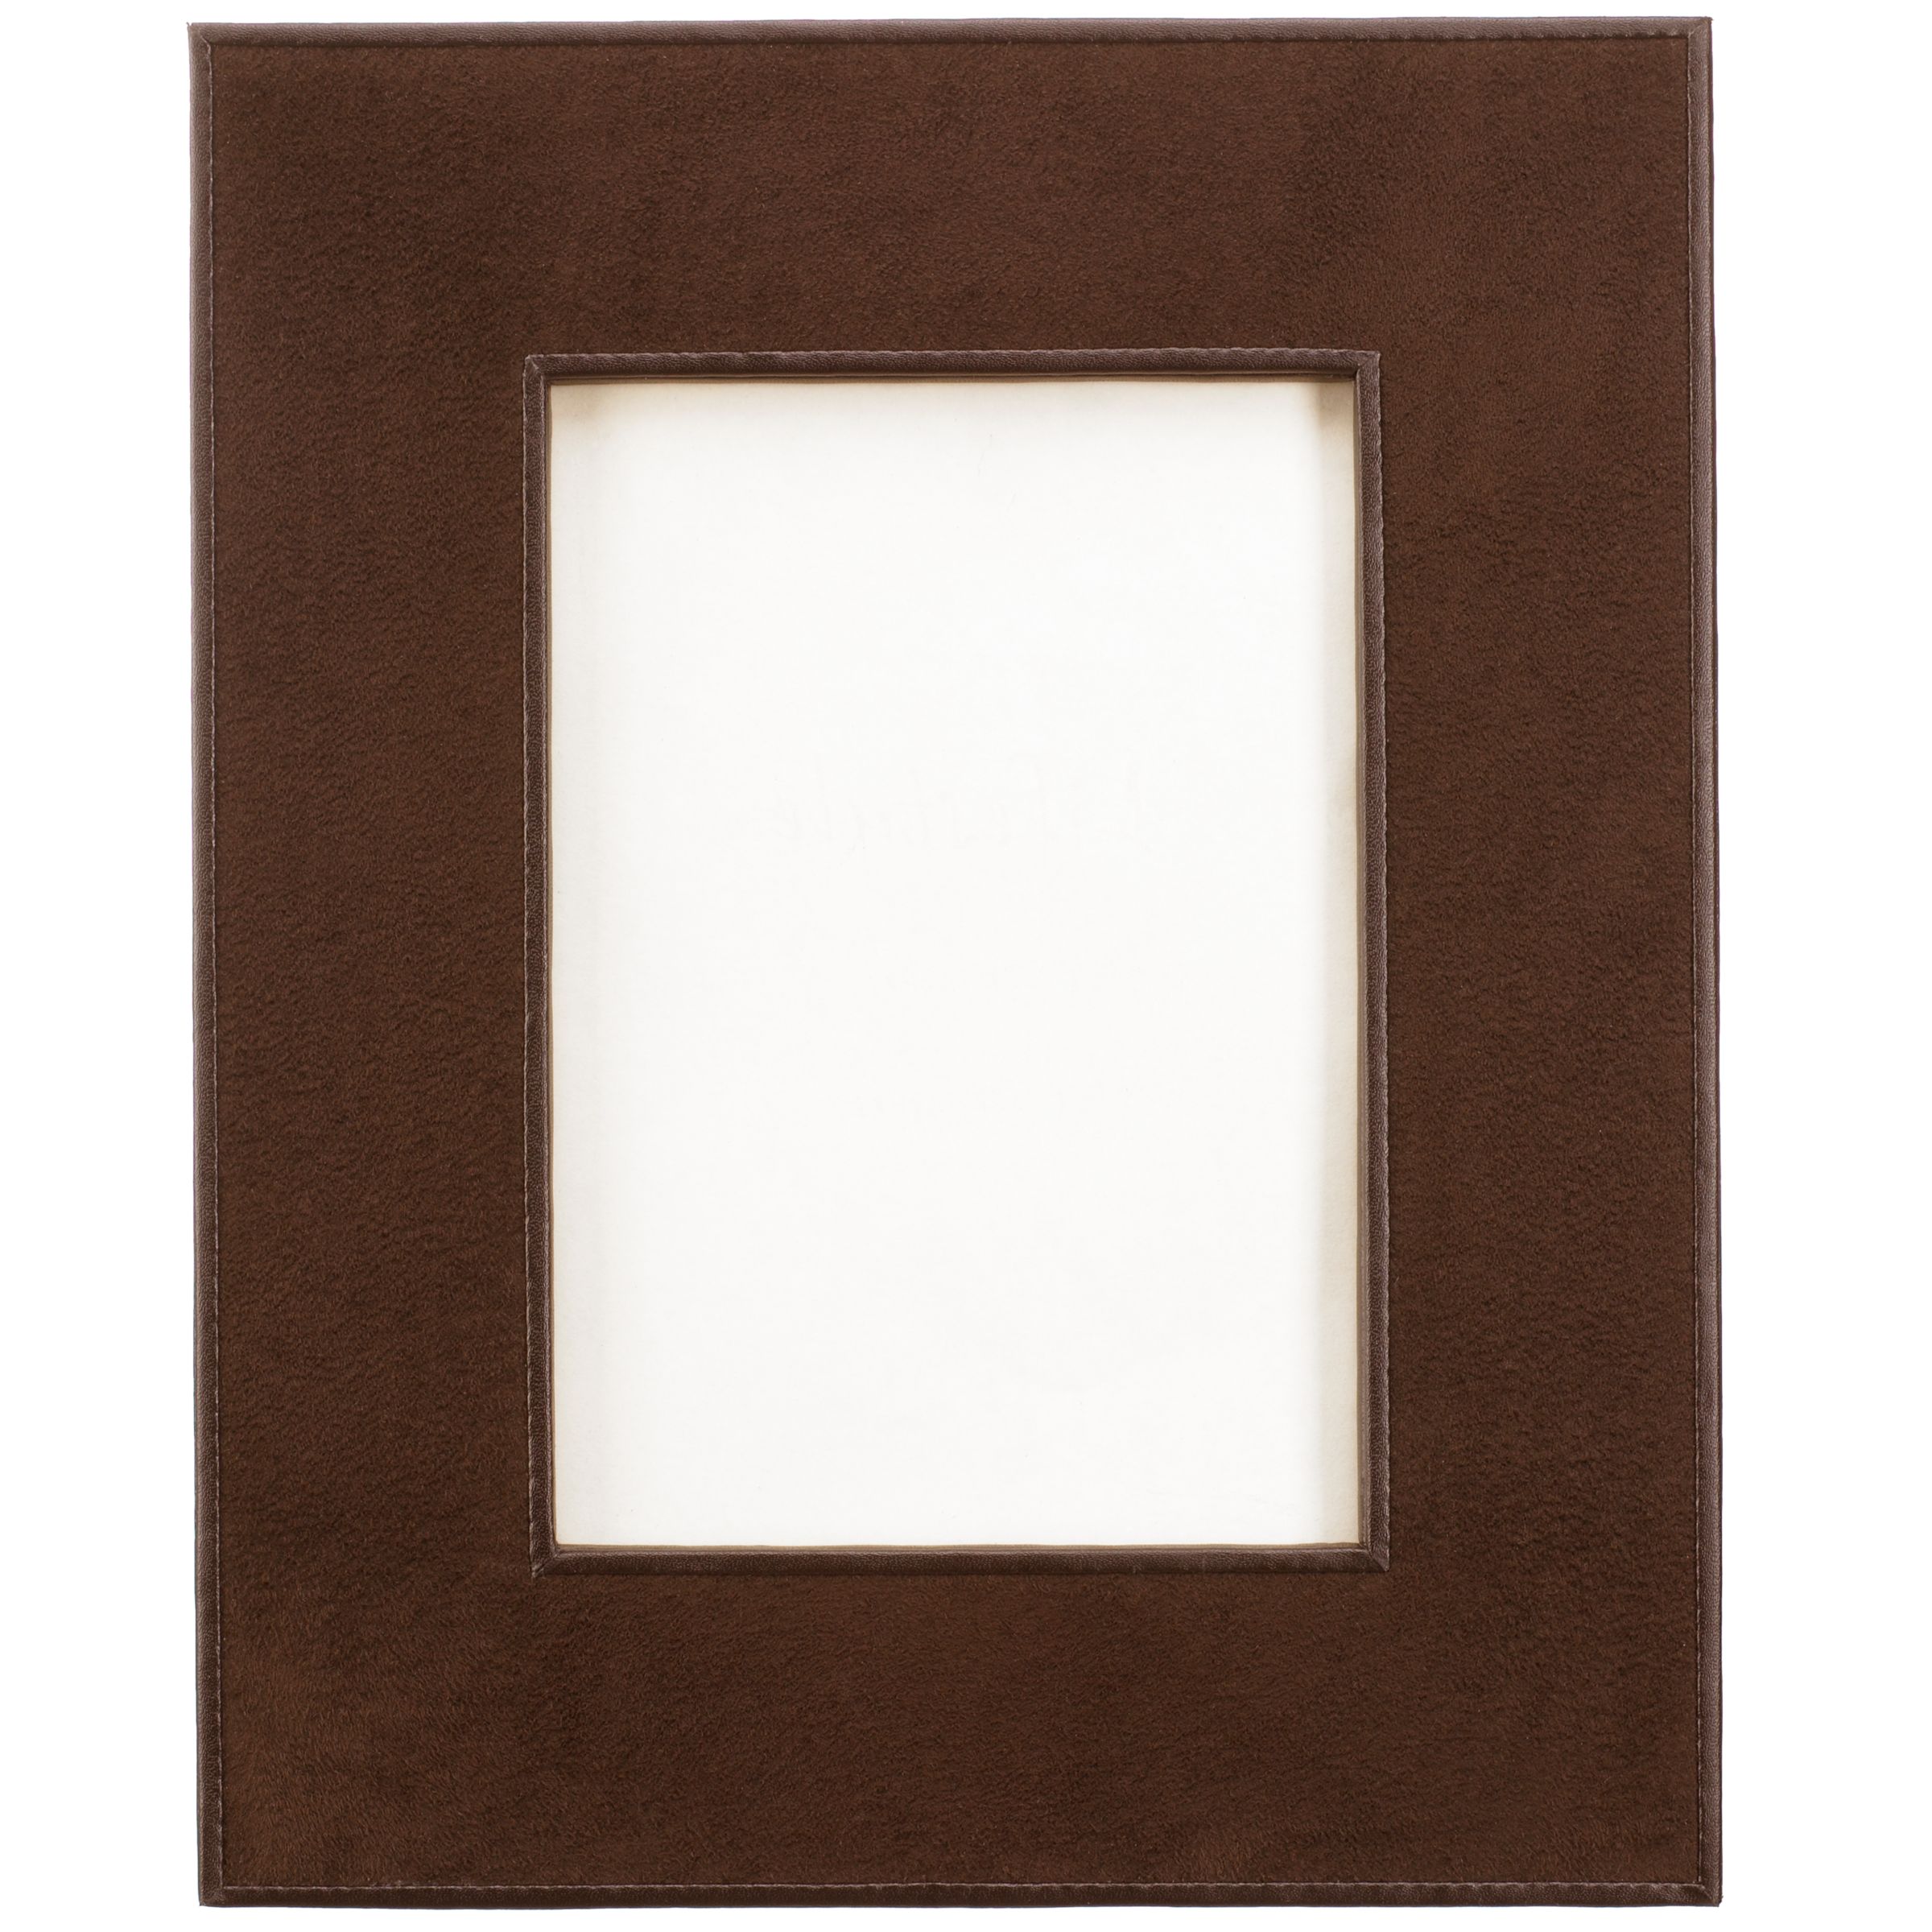 John Lewis Faux Suede Photo Frame, Chocolate